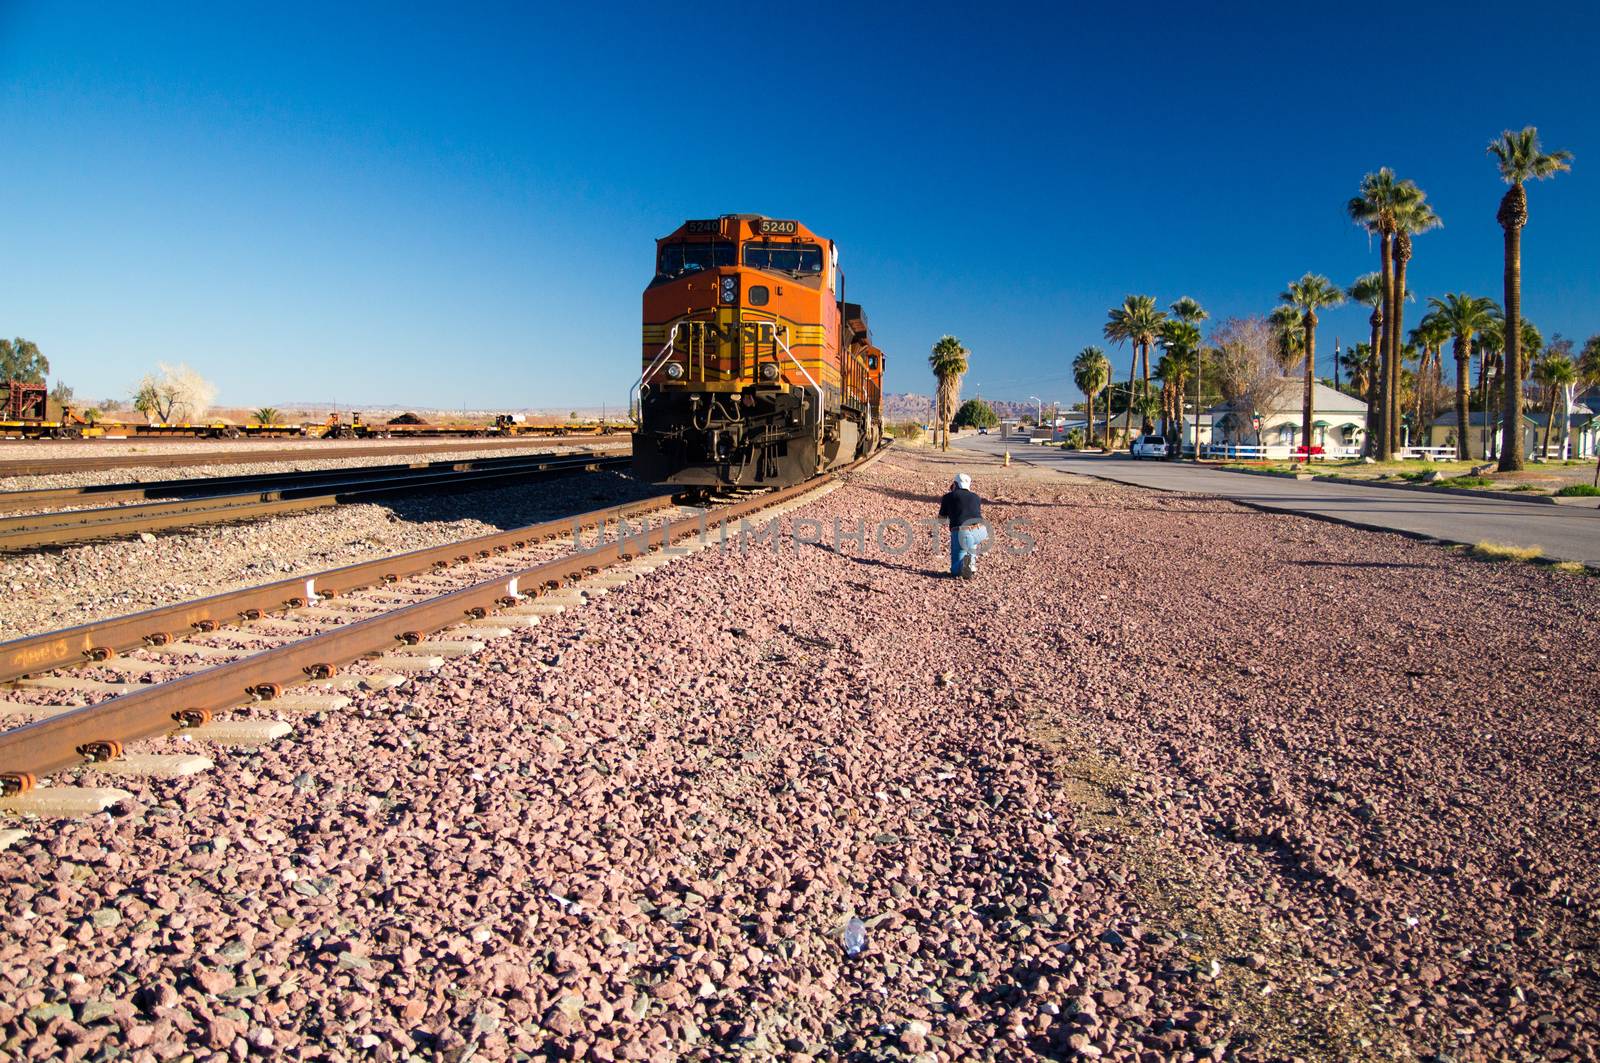 Photographer captures image of distinctive orange and yellow Burlington Northern Santa Fe Locomotive freight train No. 5240 on the tracks at the town of Needles, California. Photo taken in February 2013.